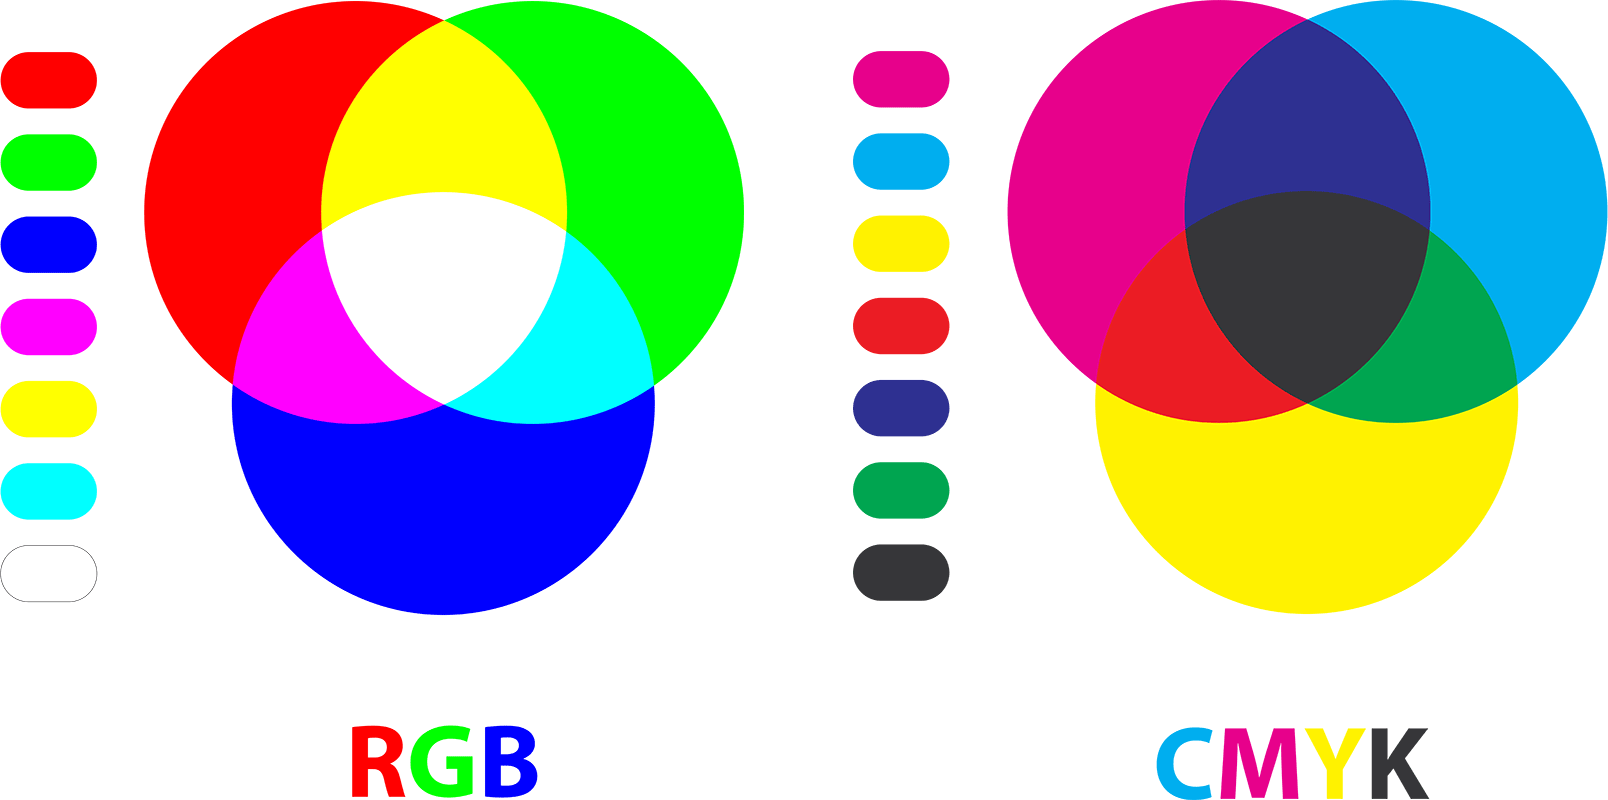 RGB, CMYK - When and where